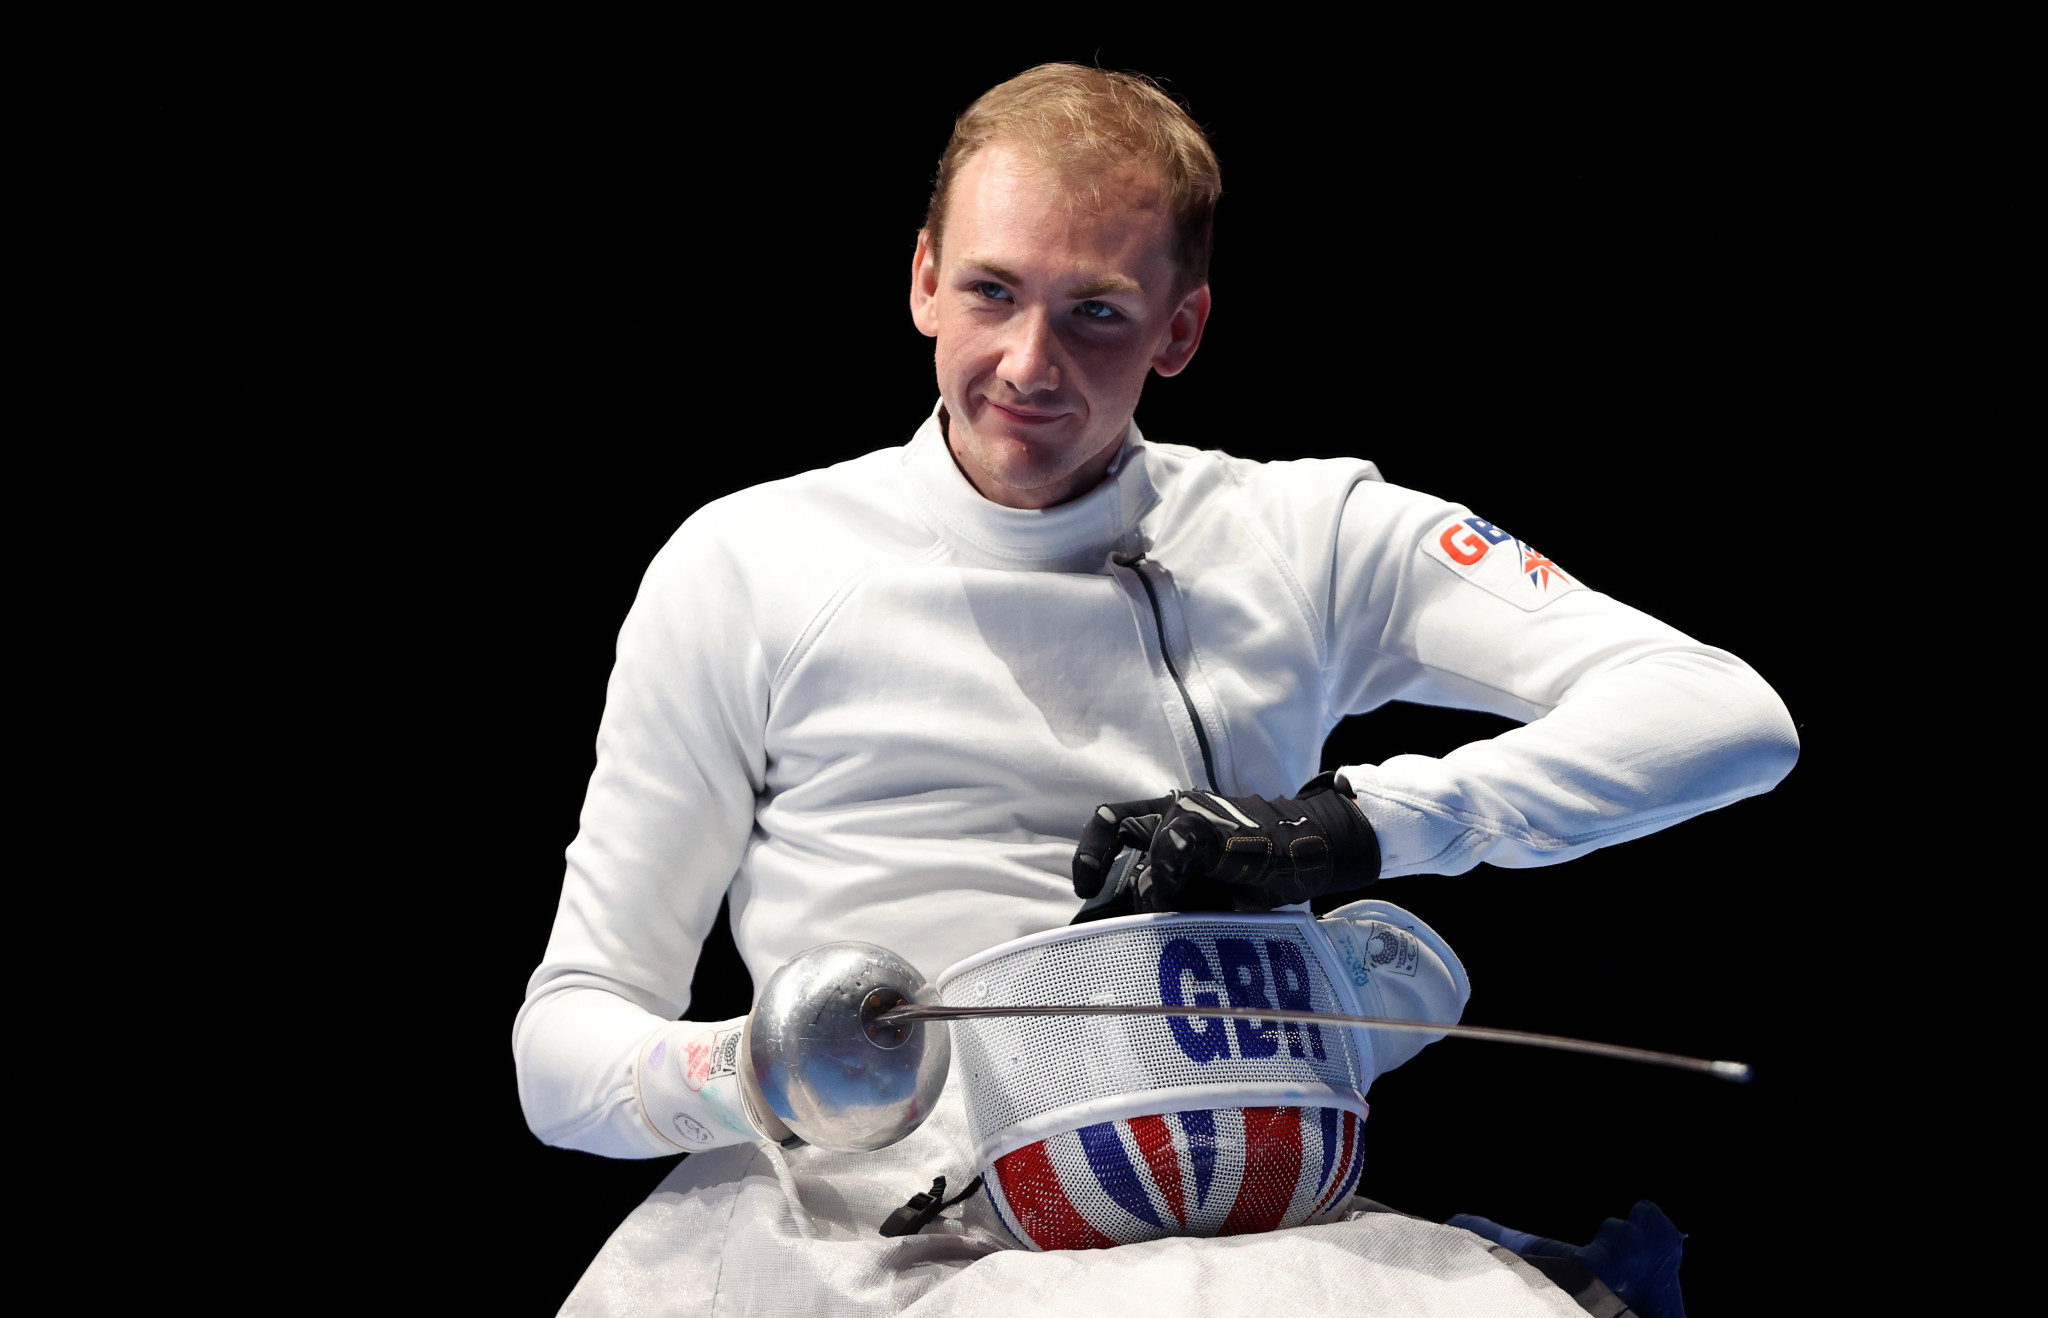 Pier Gilliver defeated Michał Nalewajek in the men's foil category A final ©Getty Images